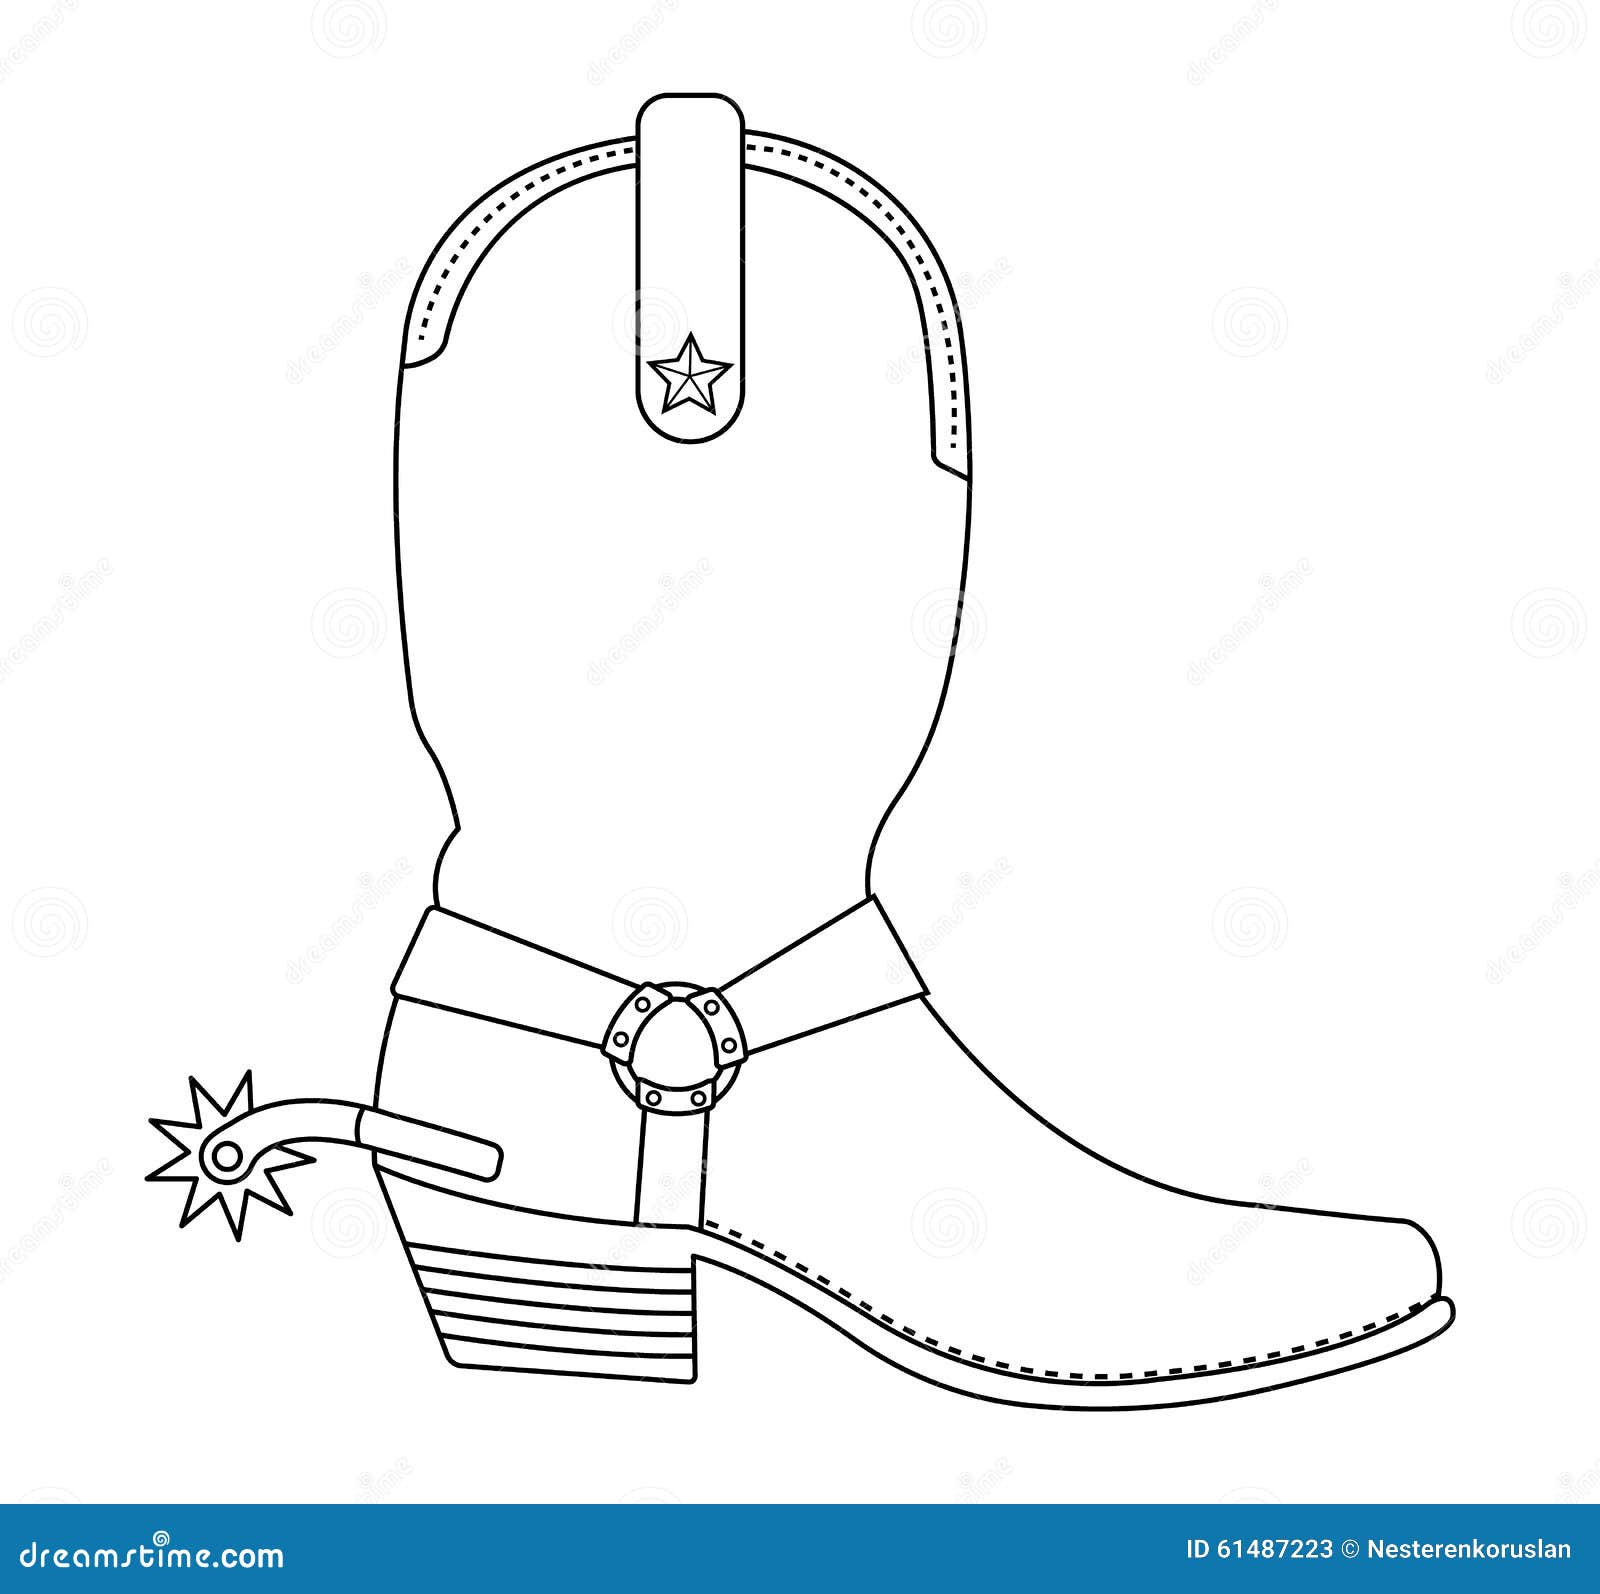 Cowboy Boot Drawing Stock Photos and Images  123RF